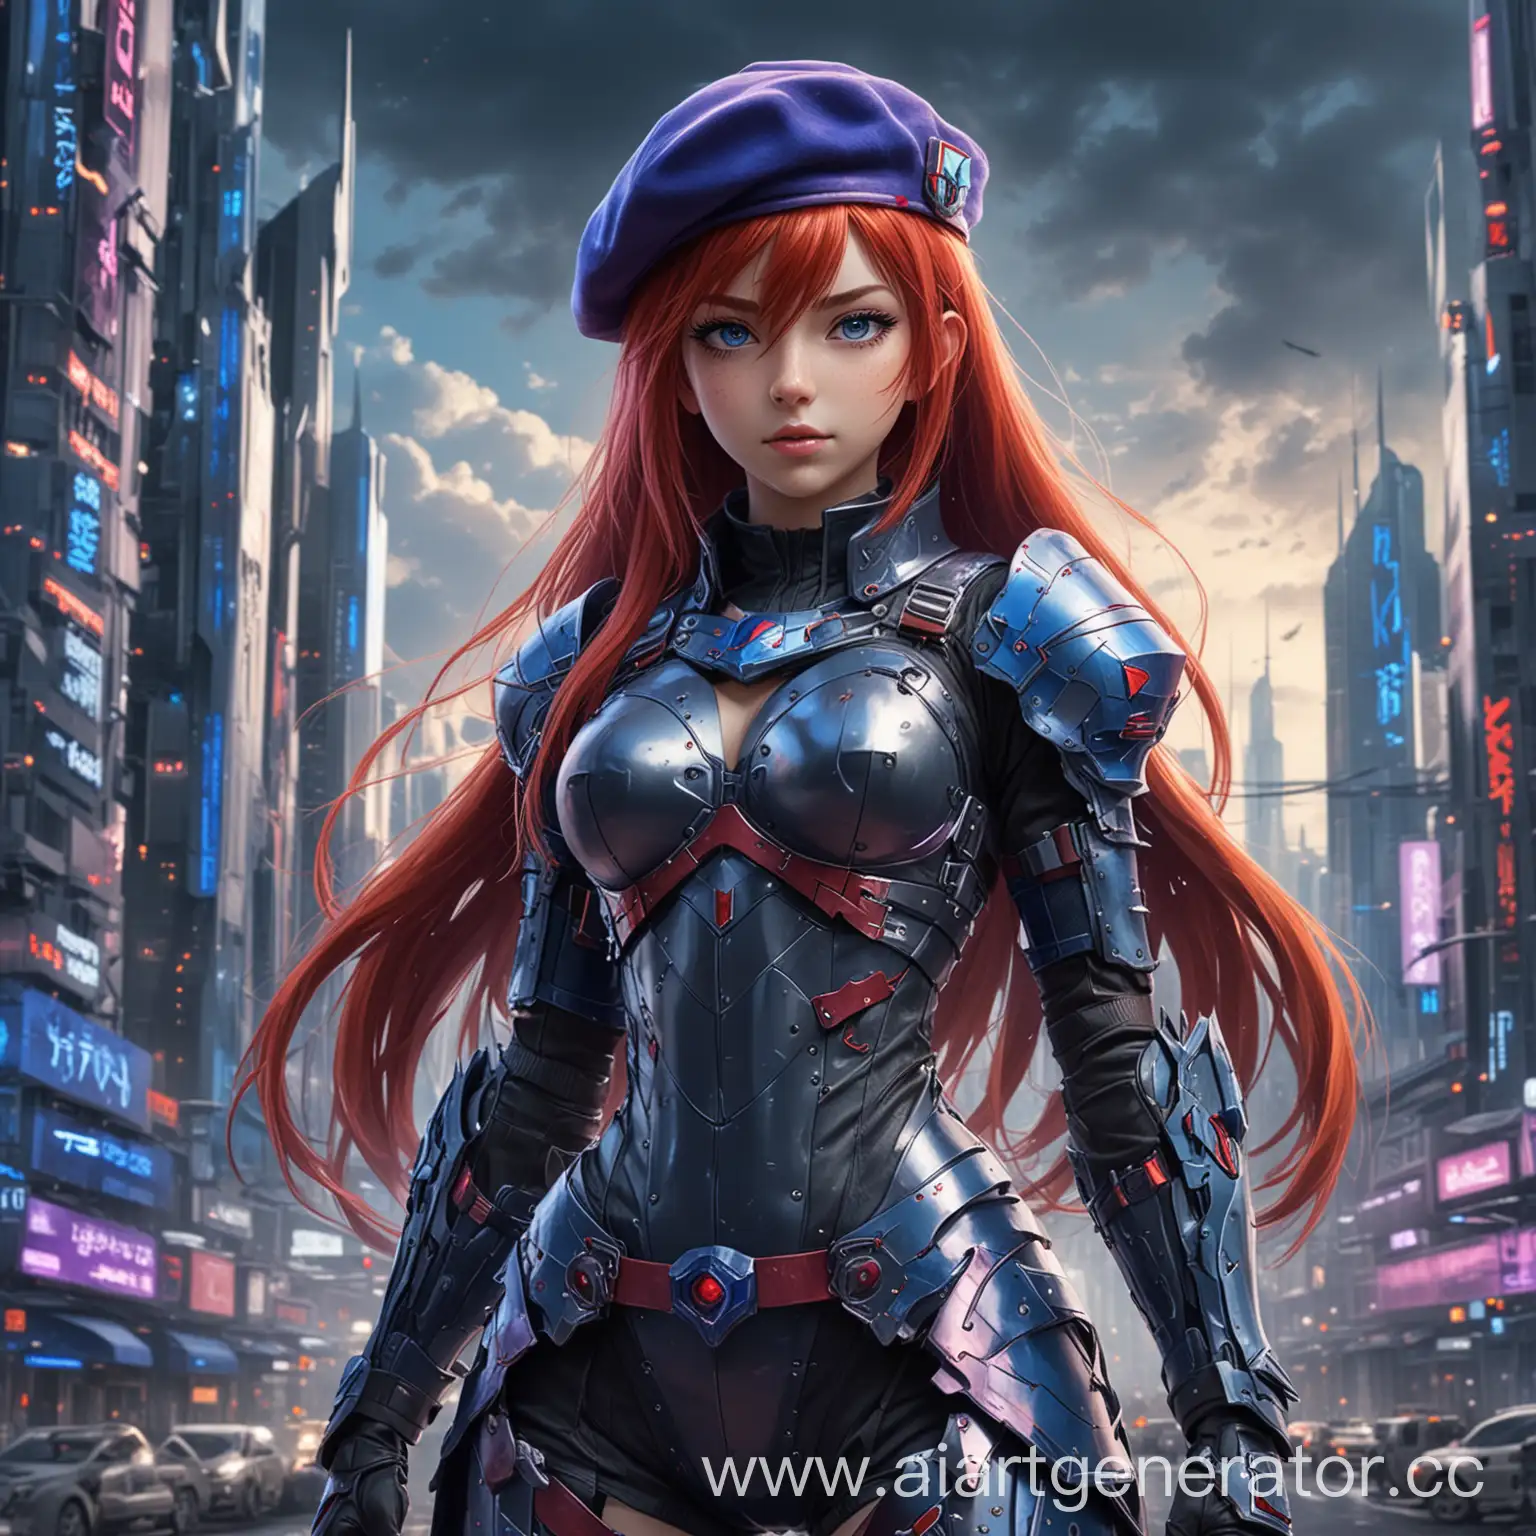 Anime-Girl-in-Full-Armor-with-Red-Hair-in-Futuristic-City